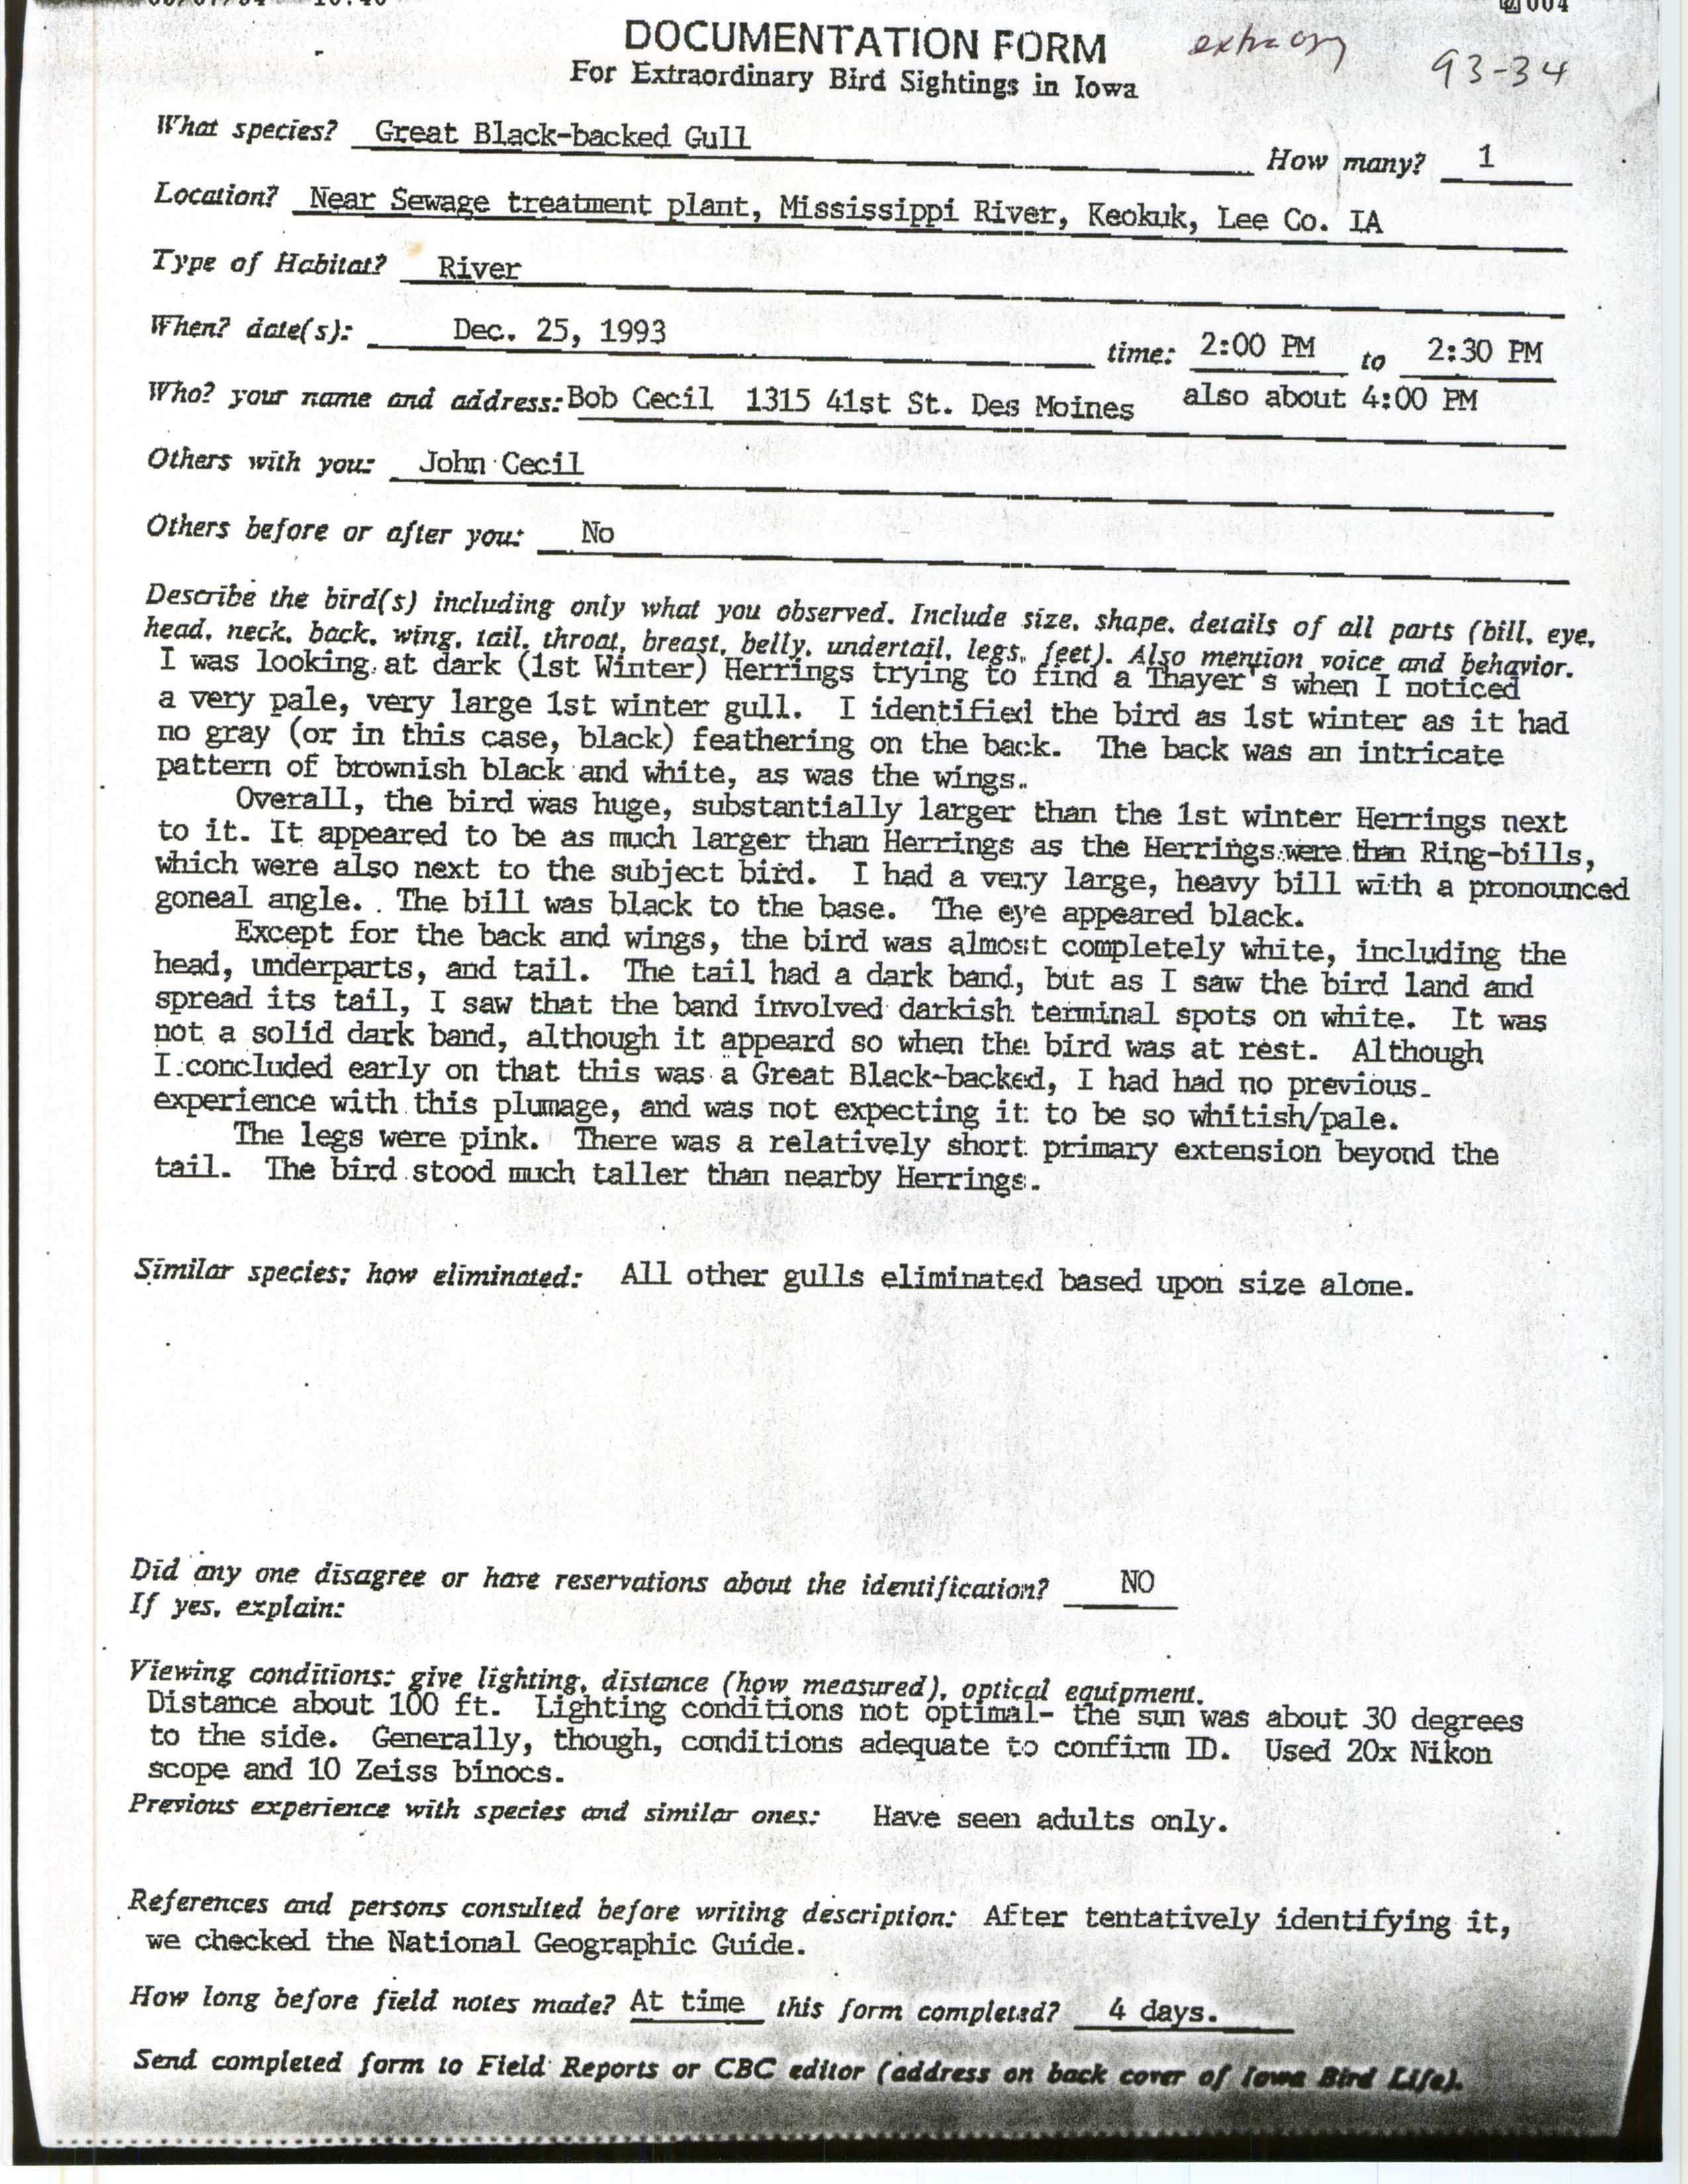 Rare bird documentation form for Great Black-backed Gull at Keokuk Wasterwater Plant, 1993